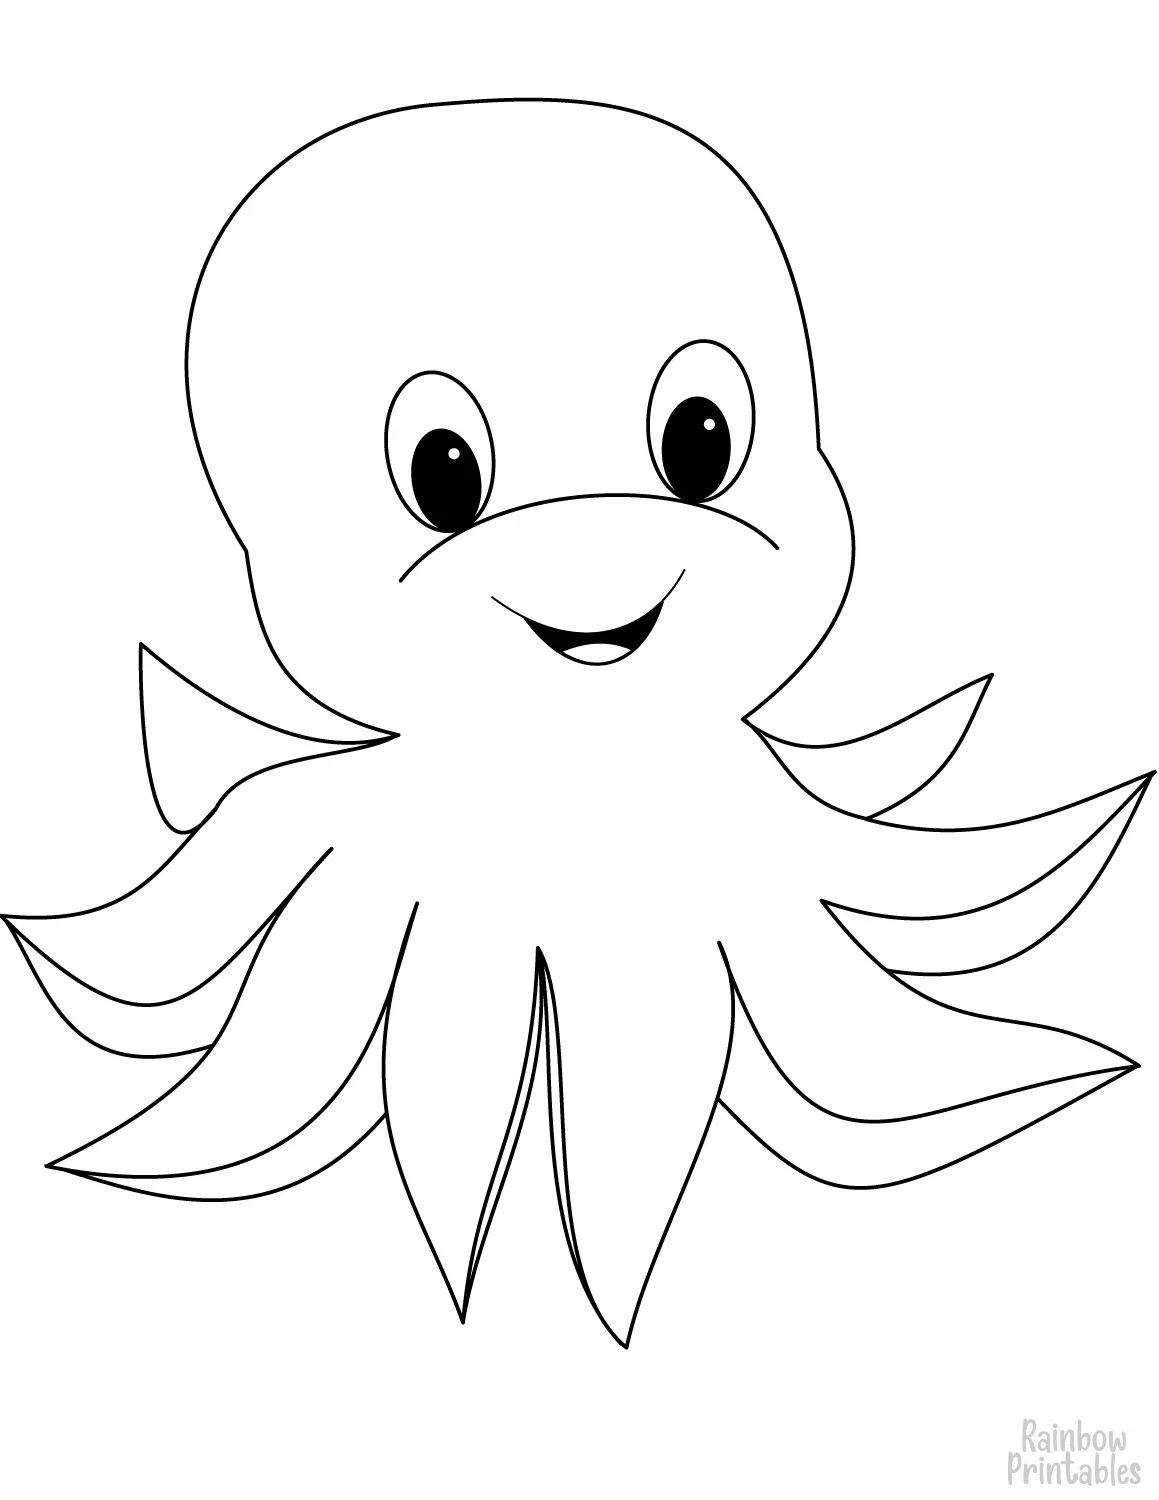 SIMPLE-EASY-line-drawings-Cute-Cartoon-Octopus-coloring-page-for-kids